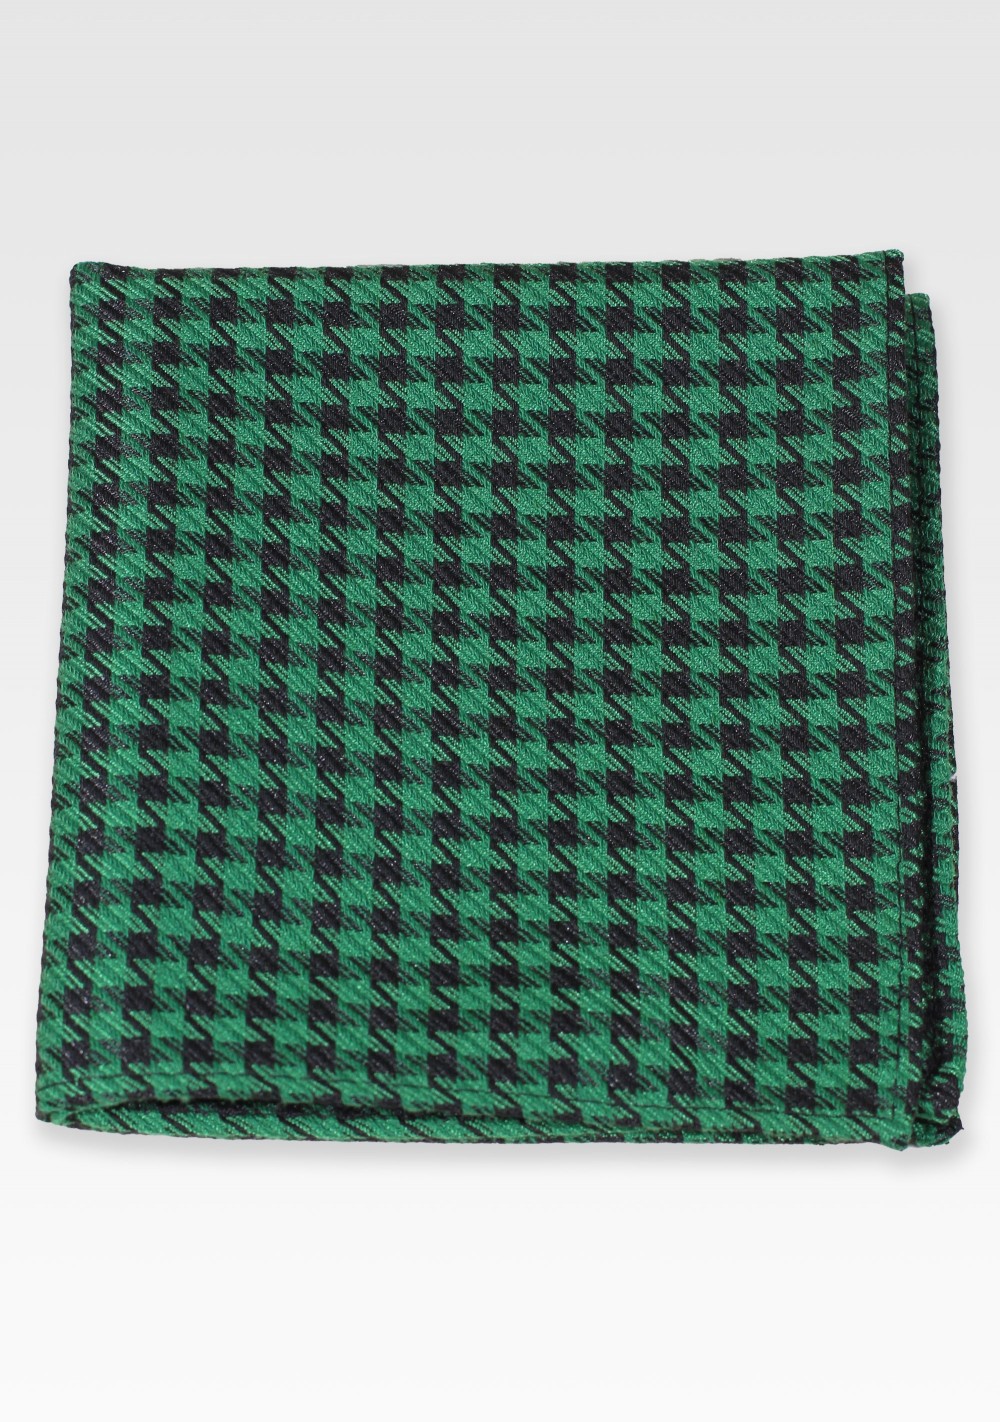 Black and Green Houndstooth Check Pocket Square